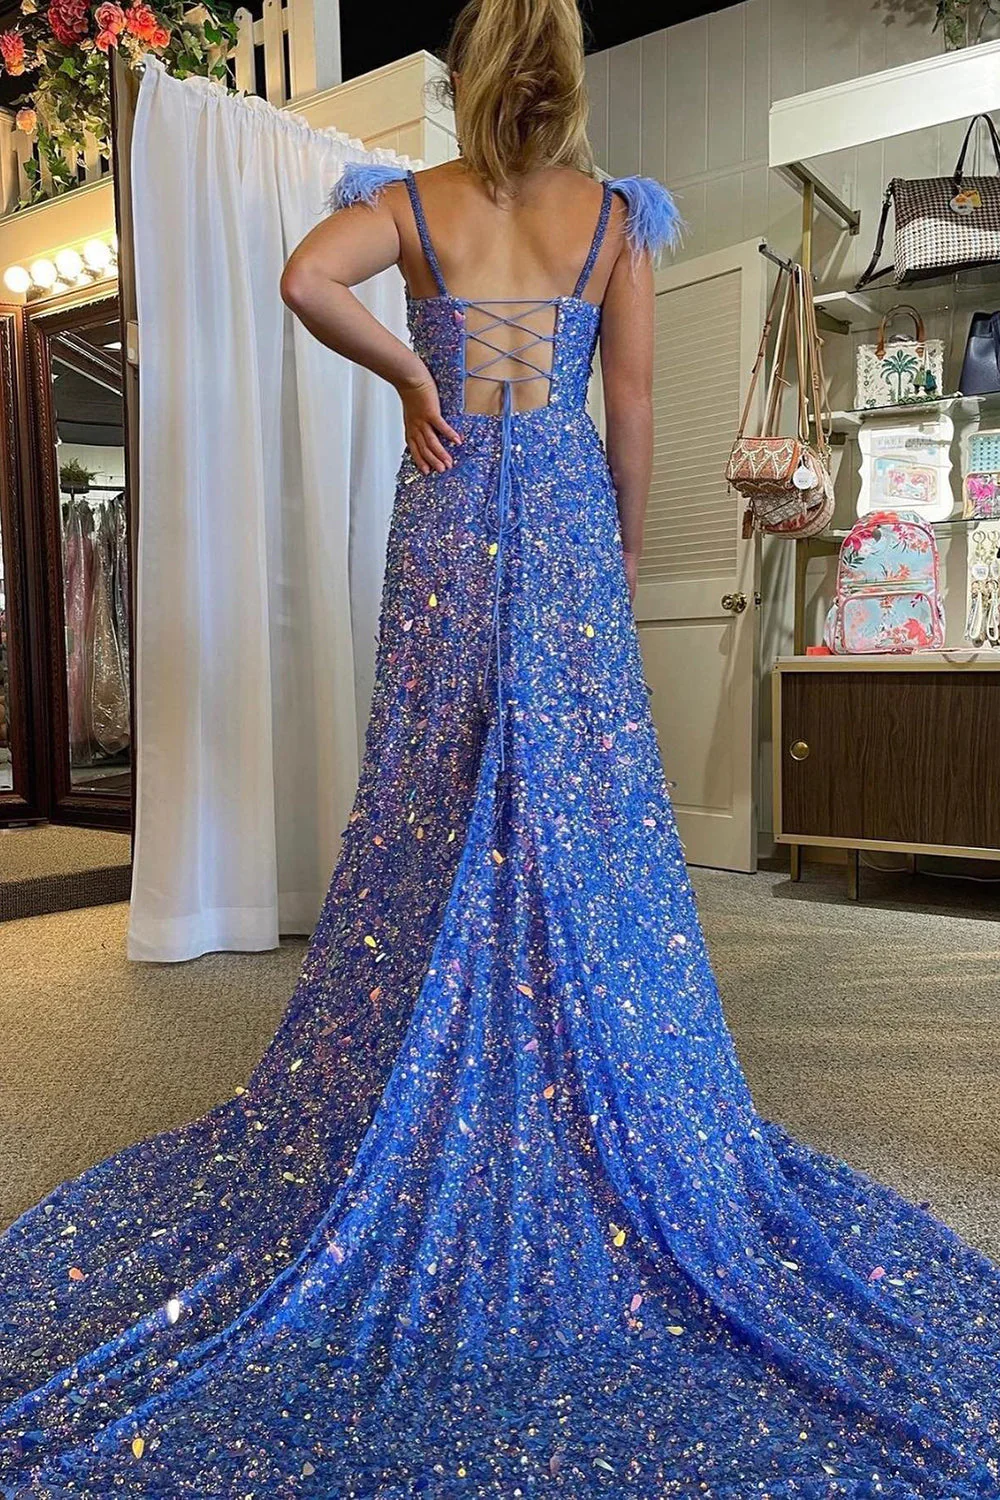 A Line Spaghetti Straps Blue Sequins Long Prom Dress with Feathers nv676